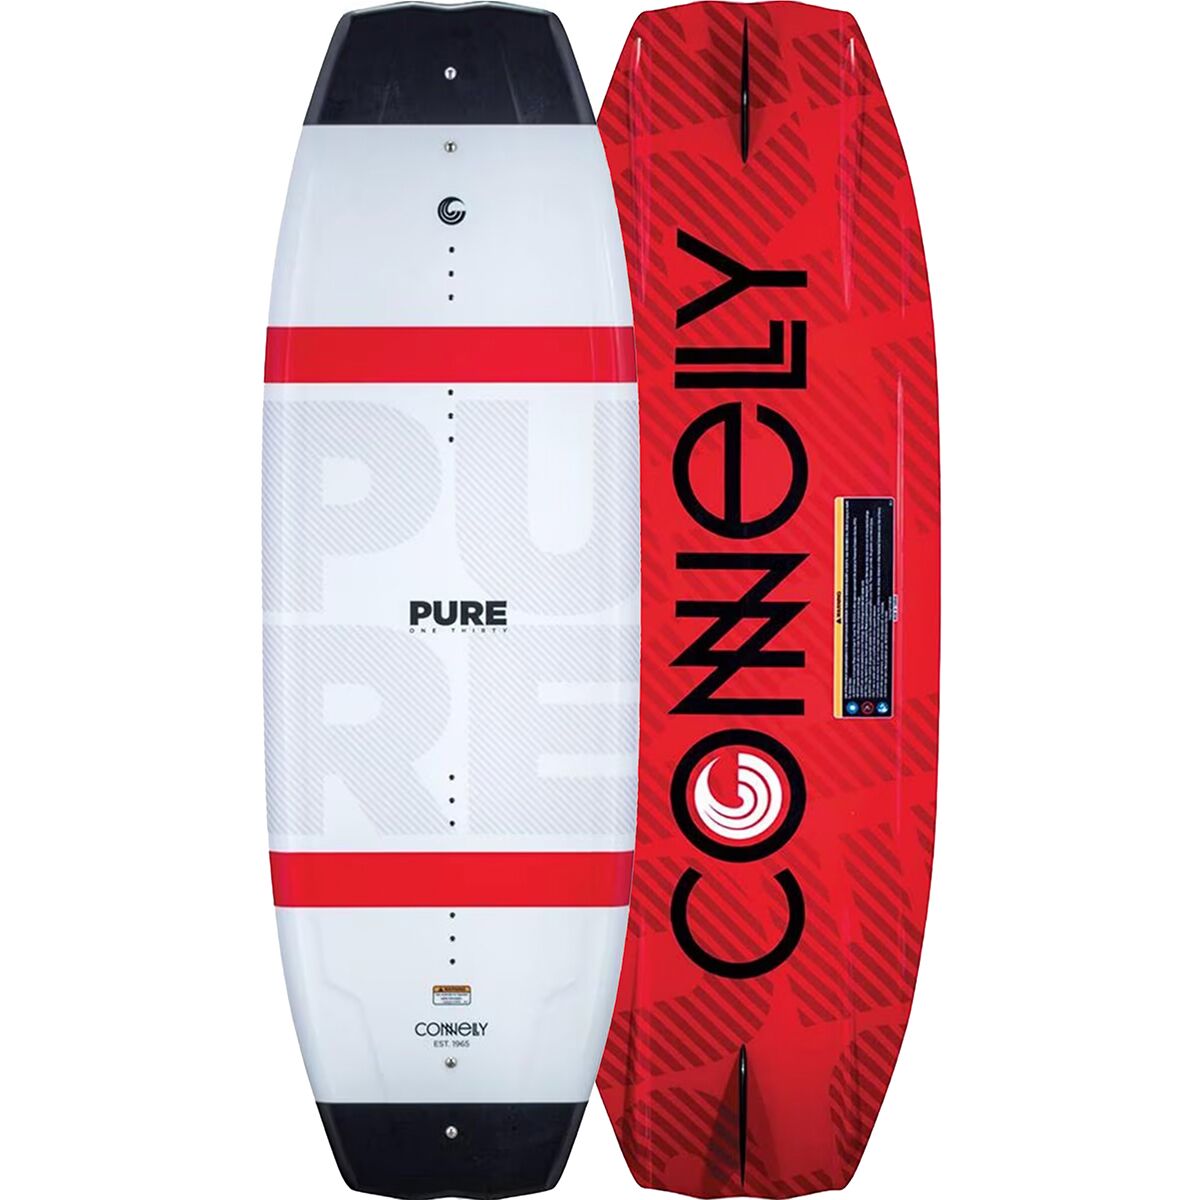 Connelly Skis Pure Venza Board + Binding